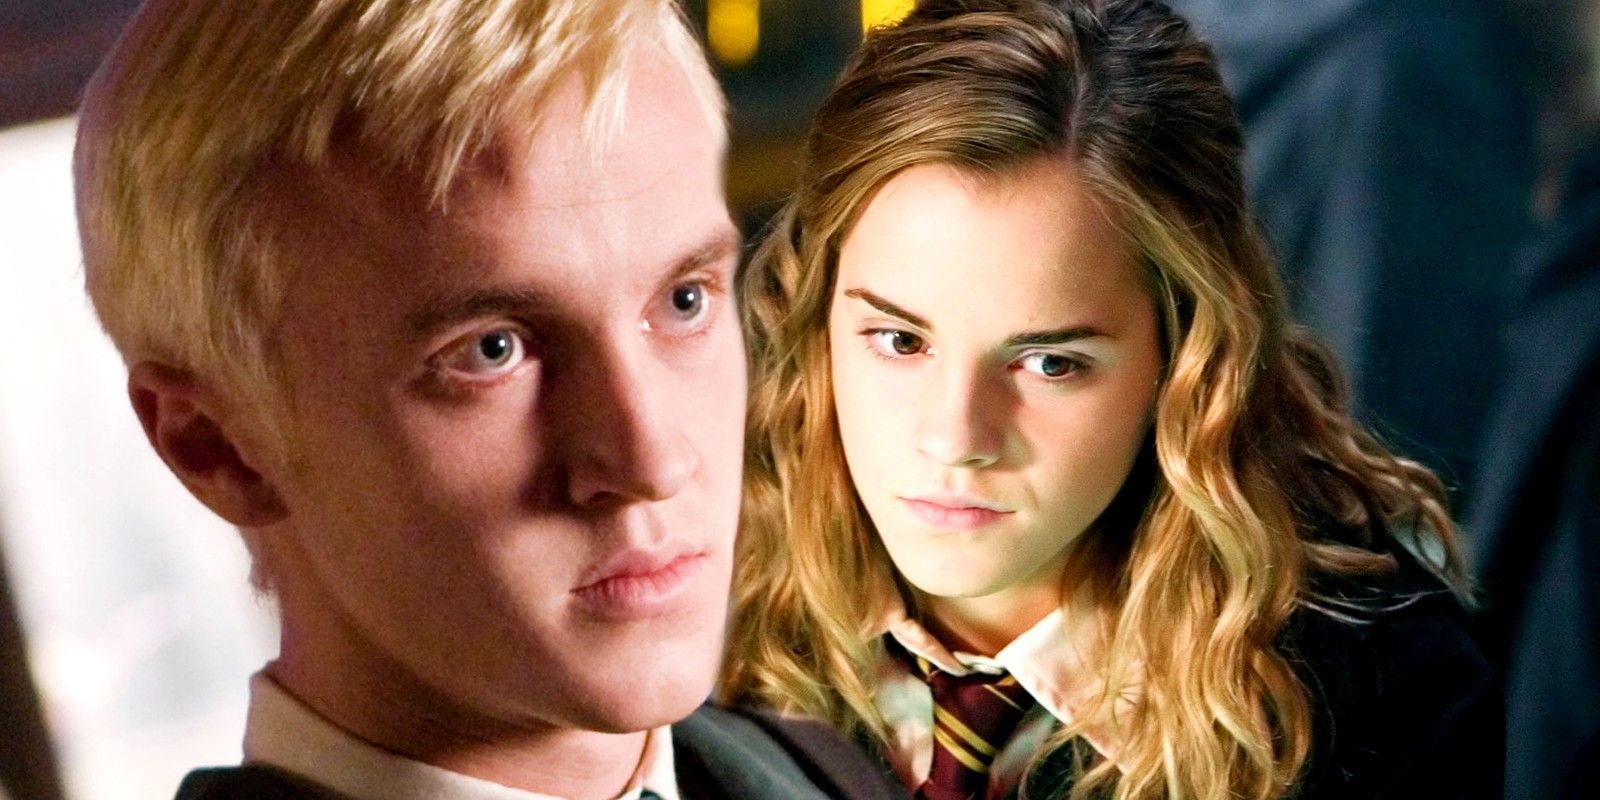 https://static1.srcdn.com/wordpress/wp-content/uploads/2023/09/custom-image-of-draco-malfoy-and-hermione-granger-in-harry-potter-and-the-half-blood-prince-1.jpg